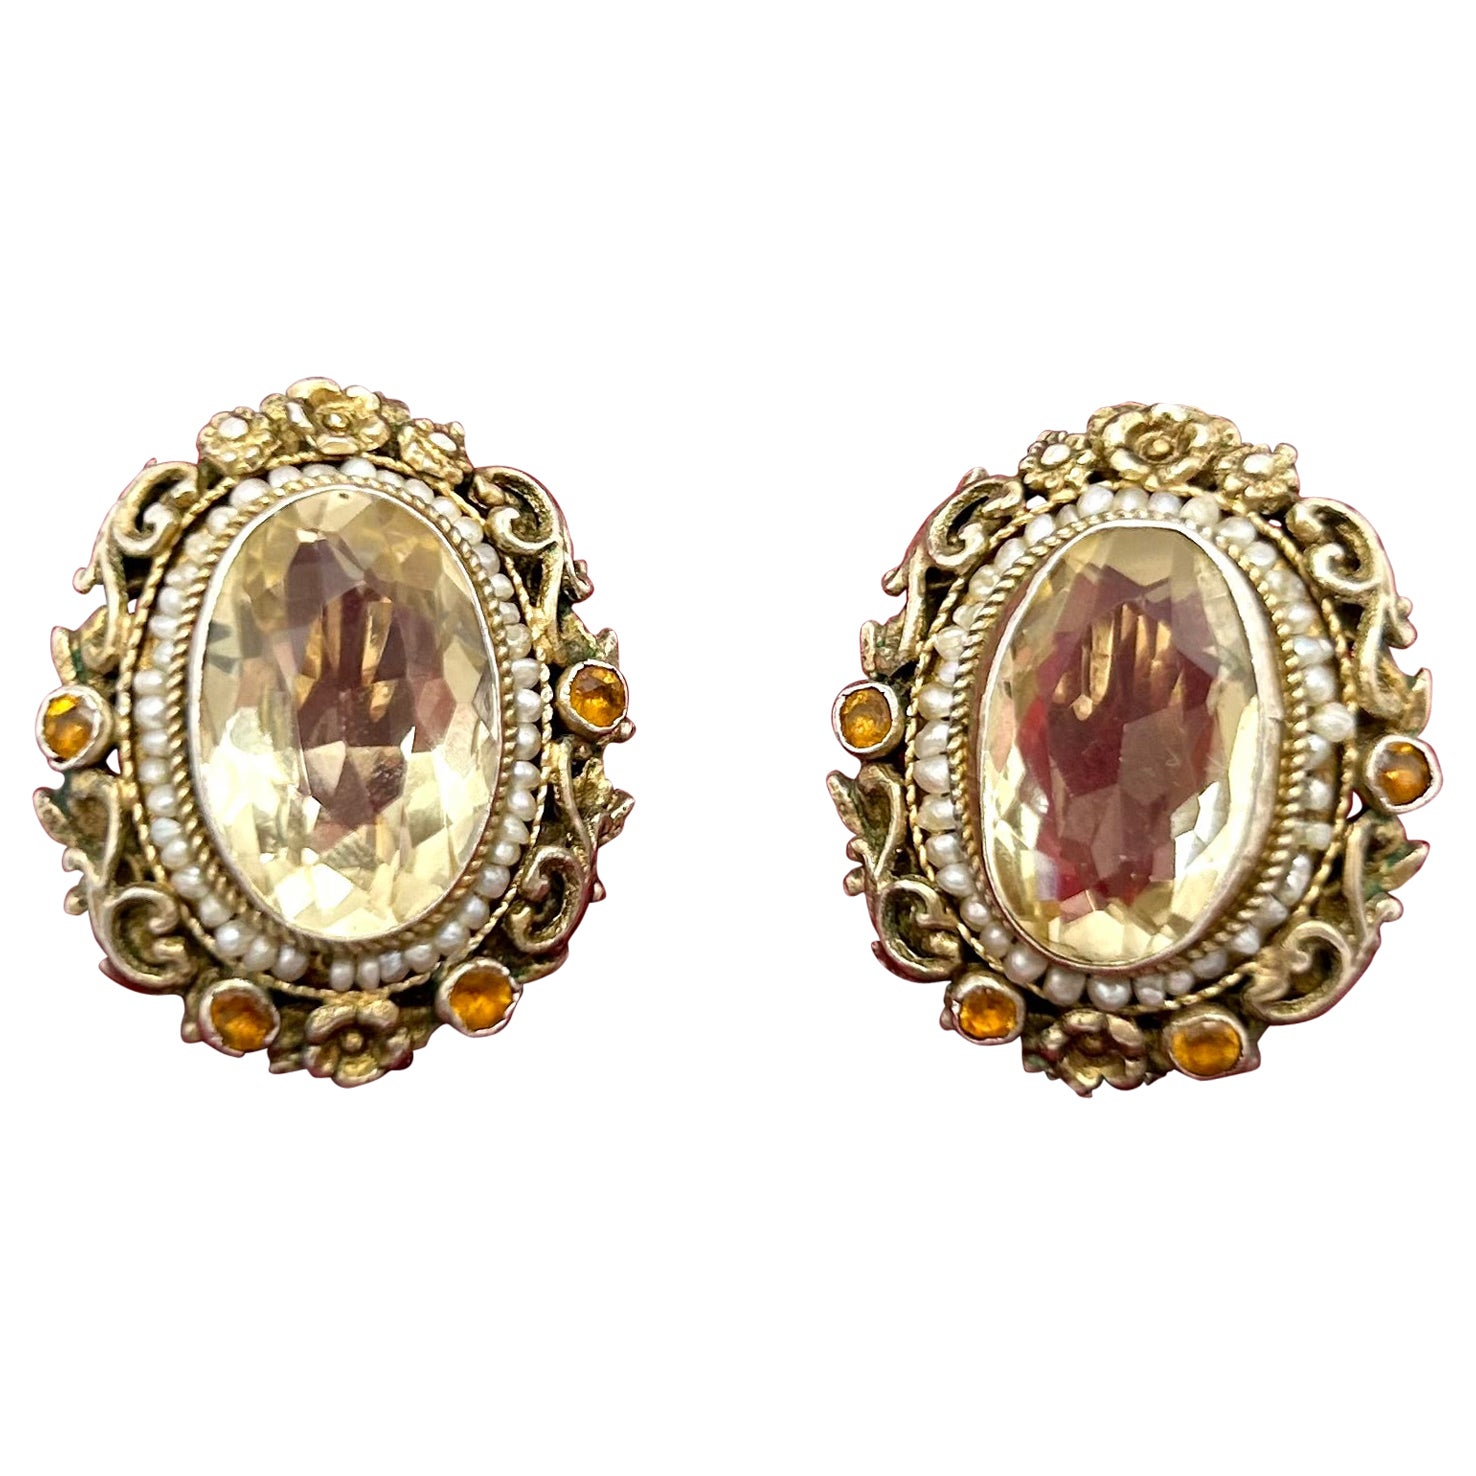 Antique silver earrings with citrines, garnets and pearls, circa 1900.